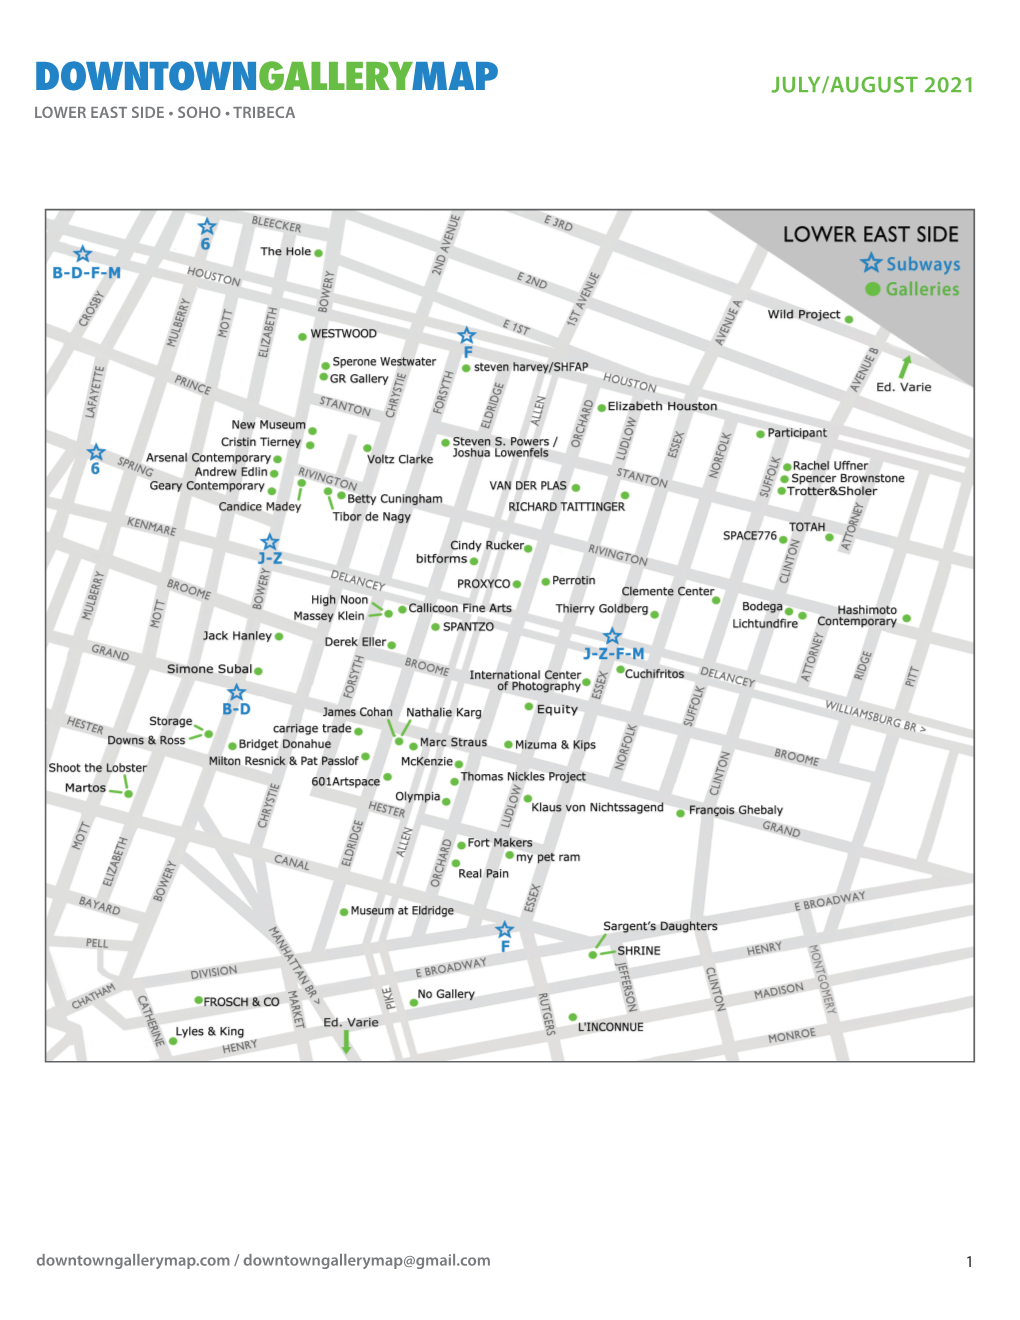 Downtown Gallery Map